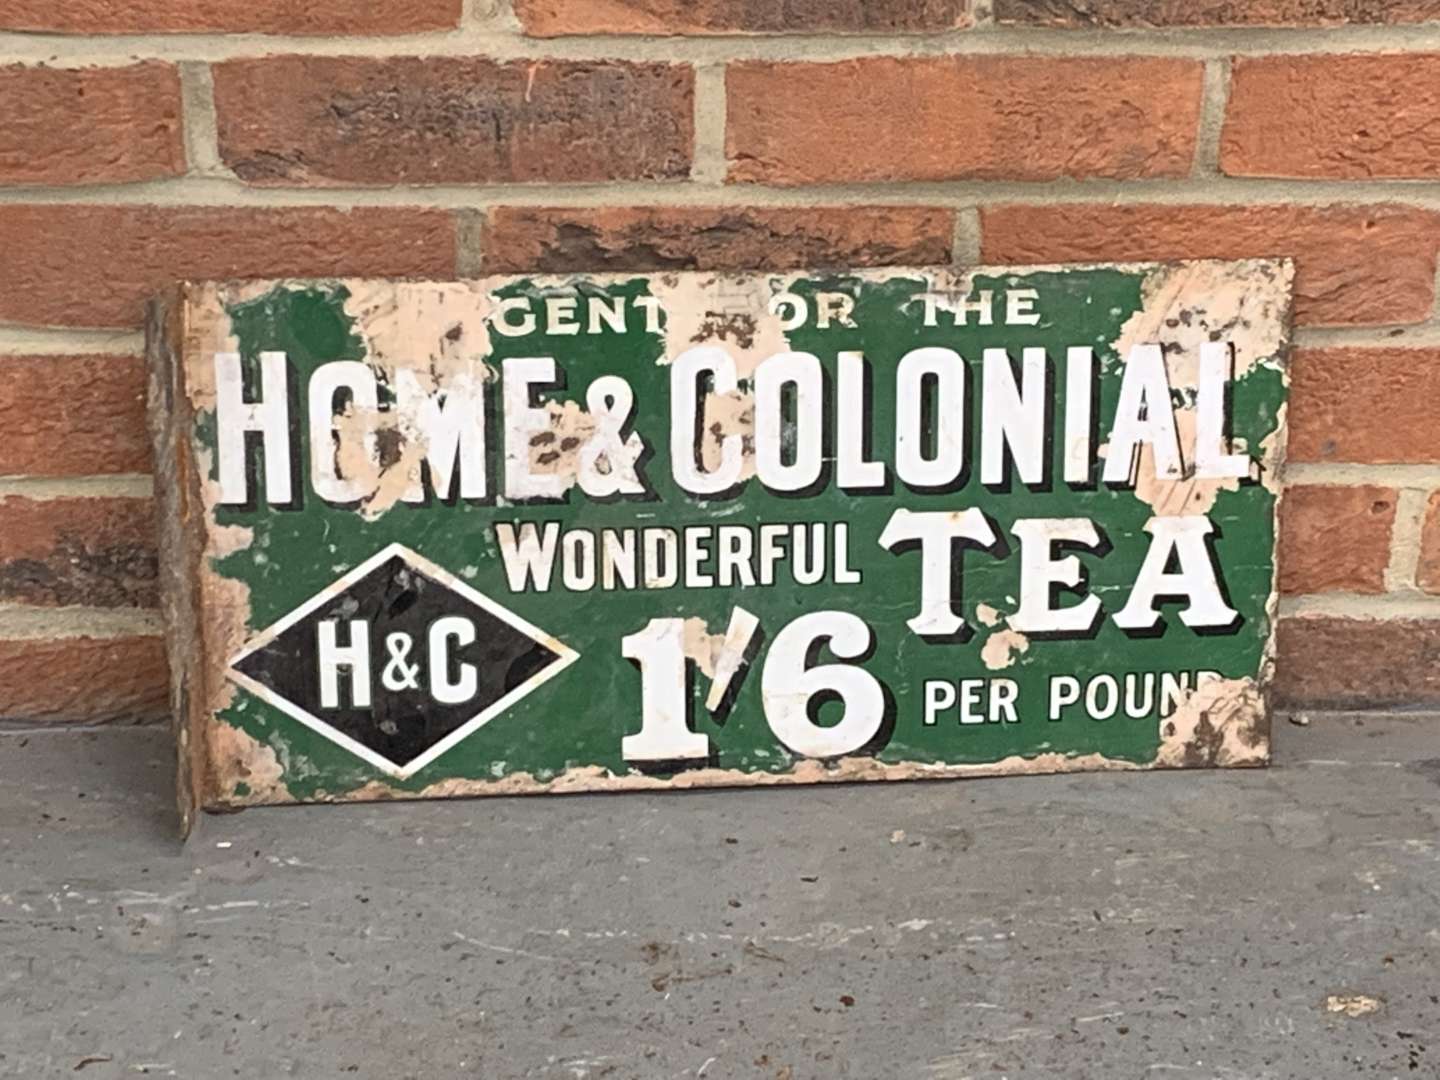 <p>Home and Colonial Tea Flange Sign</p>